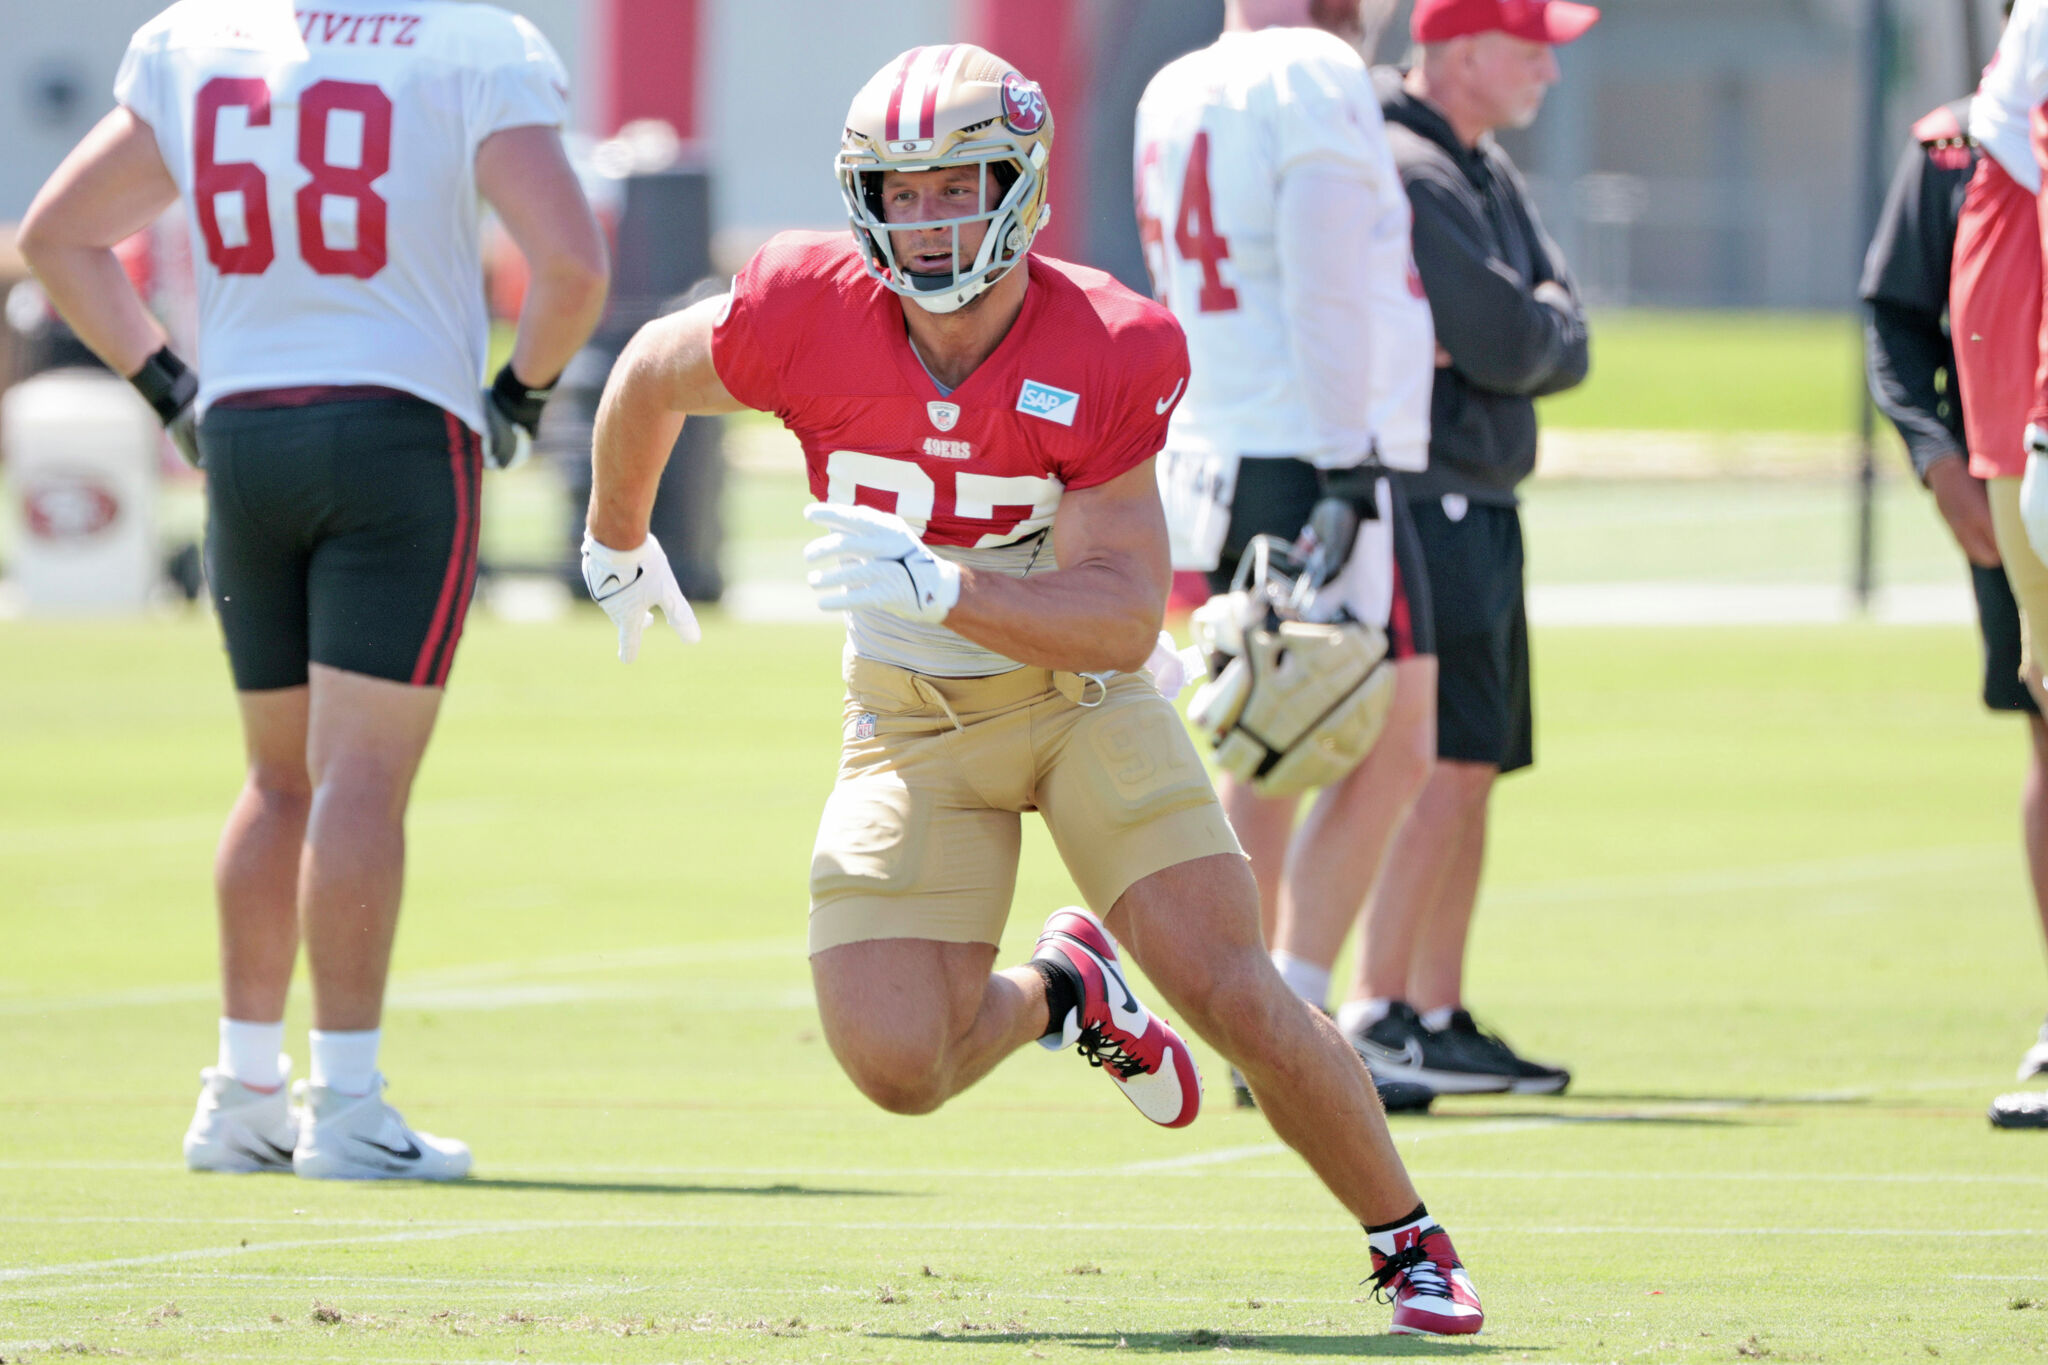 San Francisco 49ers EDGE Nick Bosa signs five-year, $170 million extension, NFL News, Rankings and Statistics